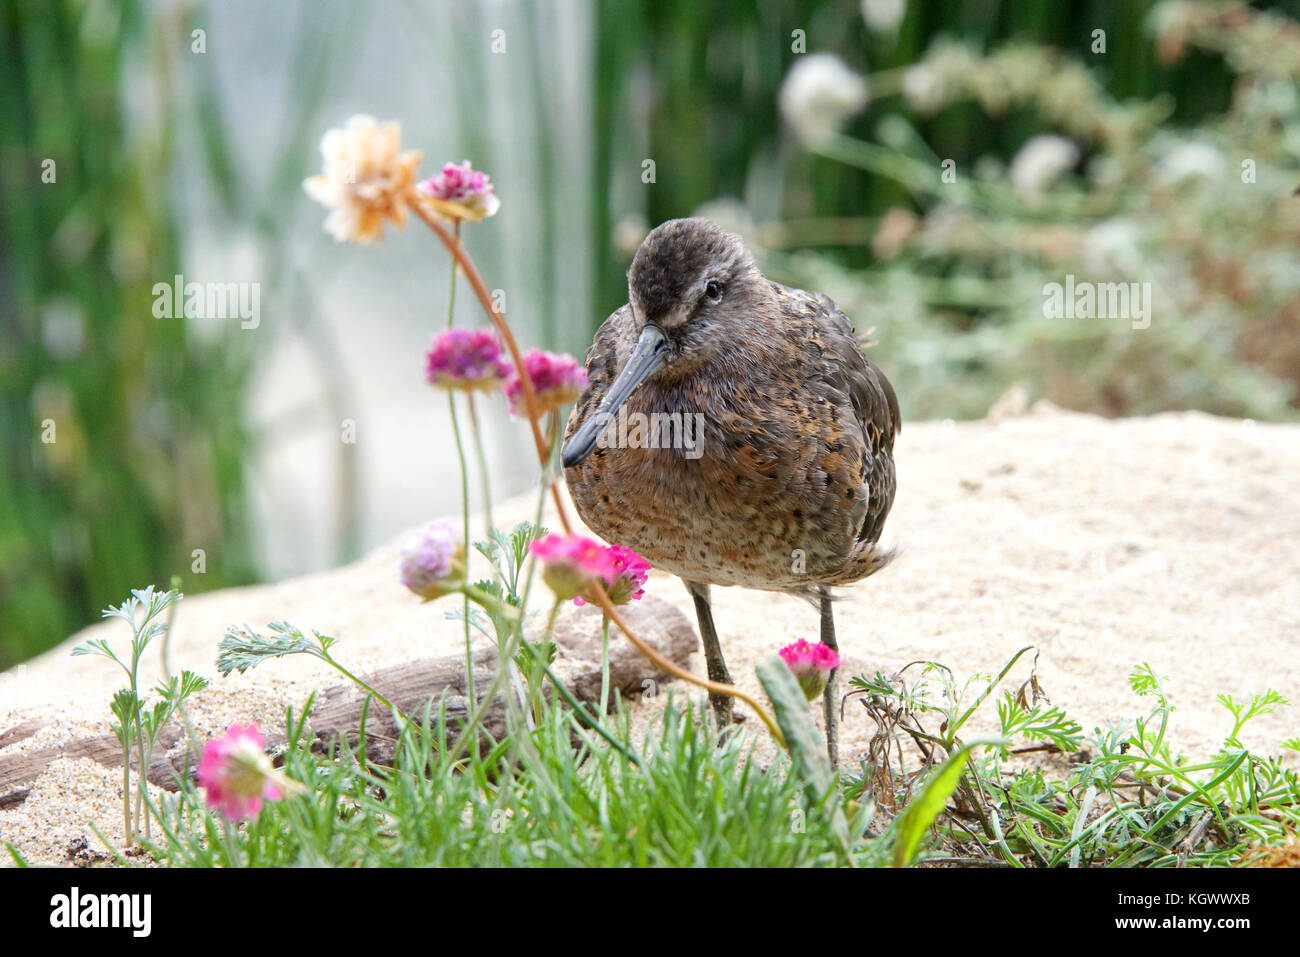 One Dowitcher bird standing on a sandy hill with flowers and shrubbery around it. Stock Photo